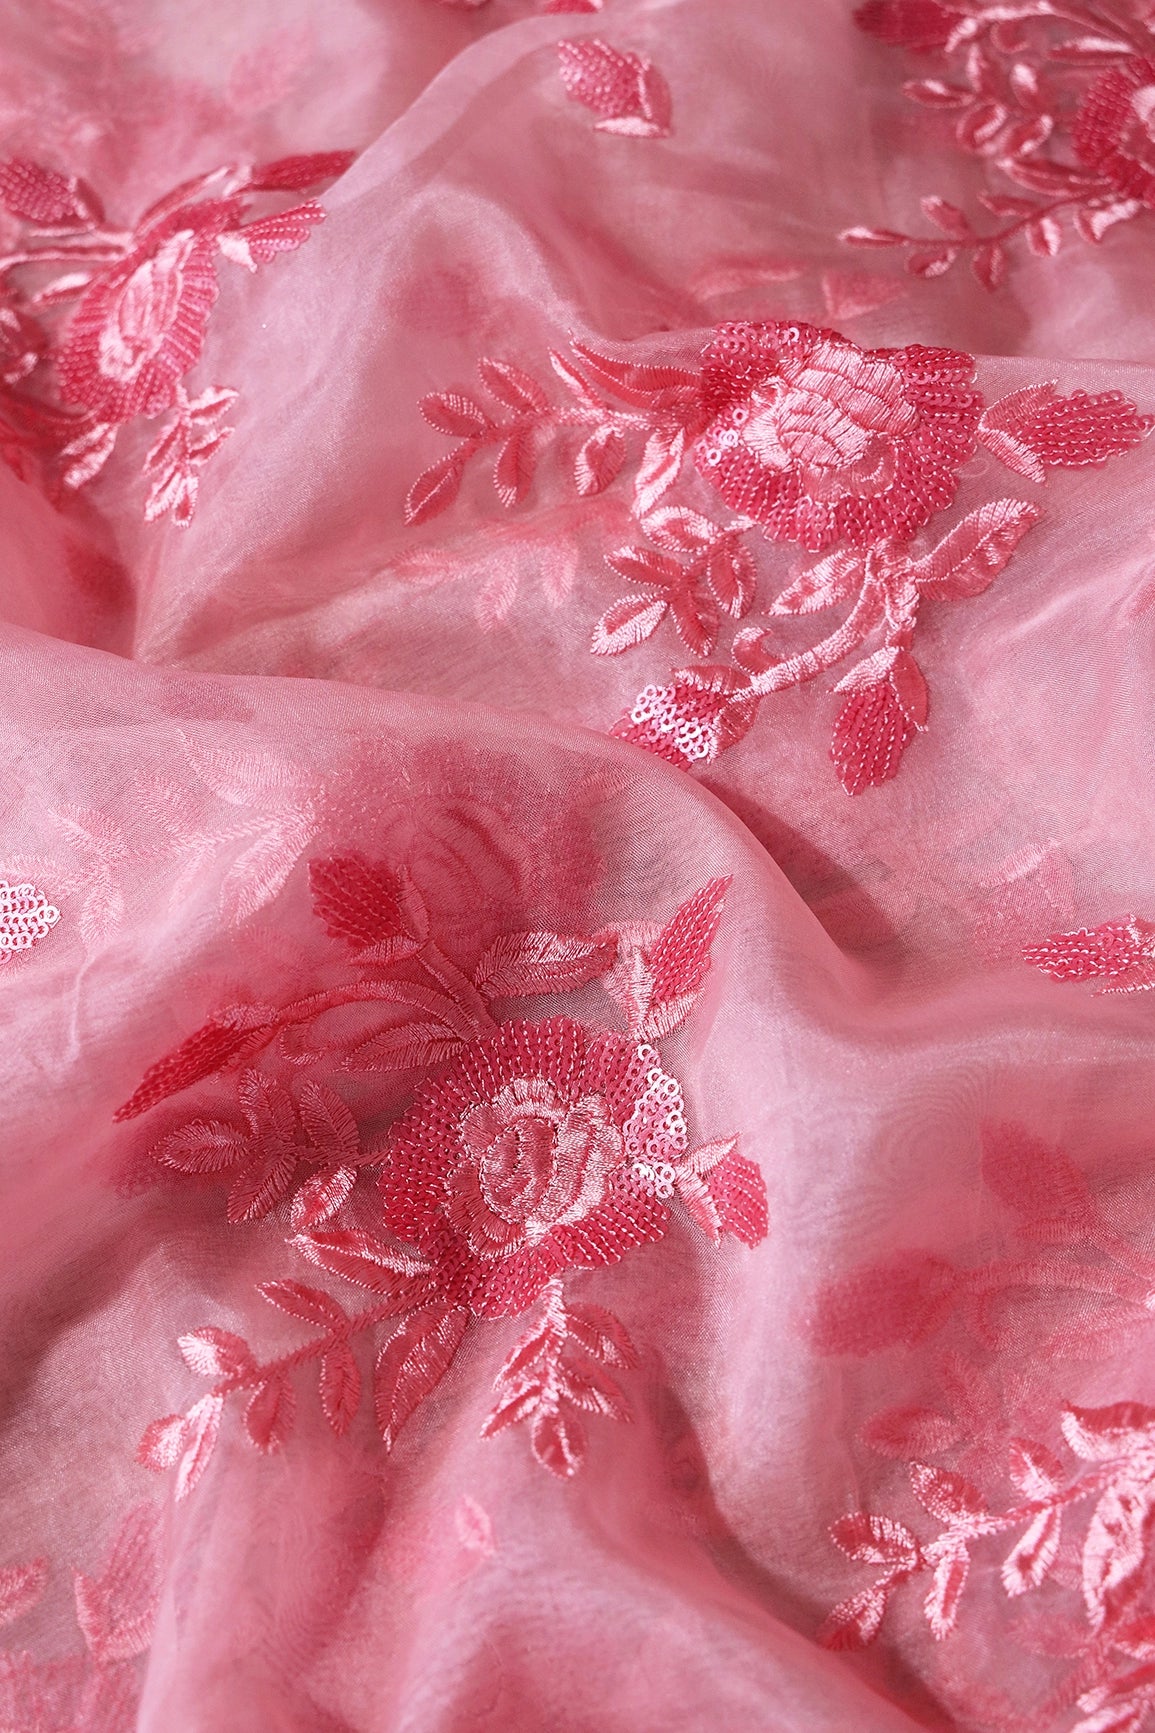 2 Meter Cut Piece Of Pink Thread With Sequins Floral Embroidery On Salmon Pink Organza Fabric